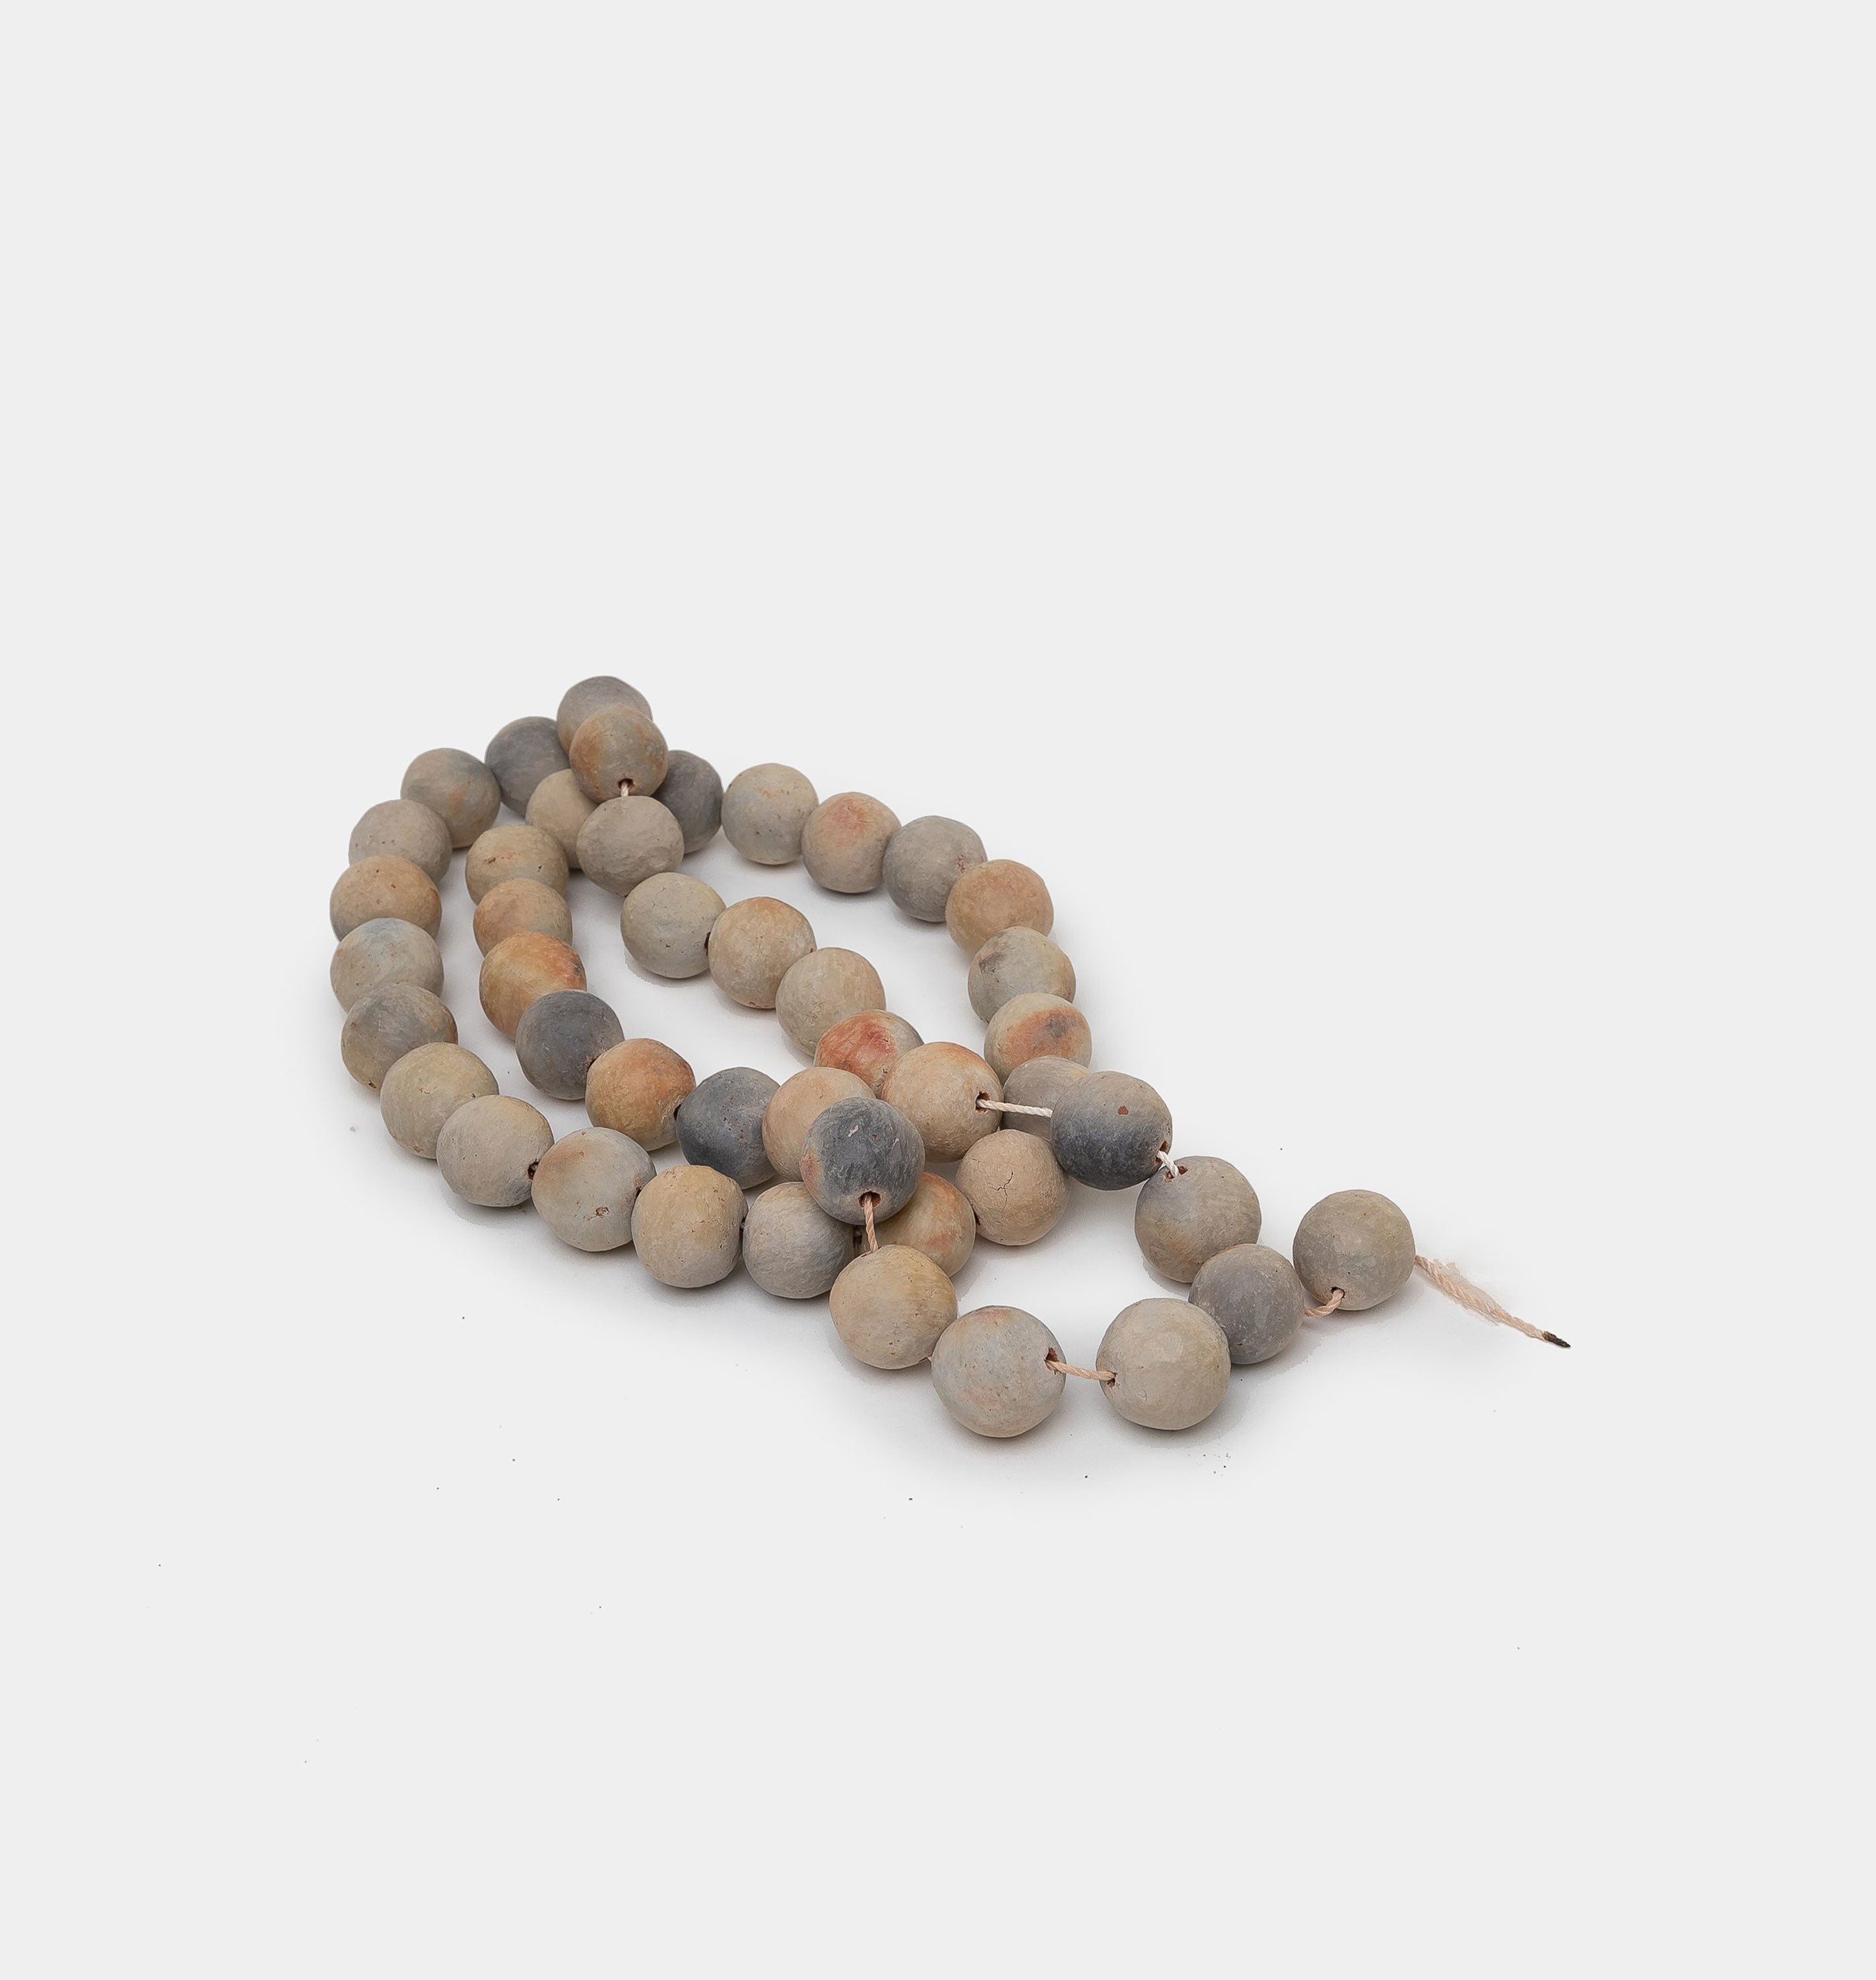 The Sejnane Handcrafted Ceramic Beads